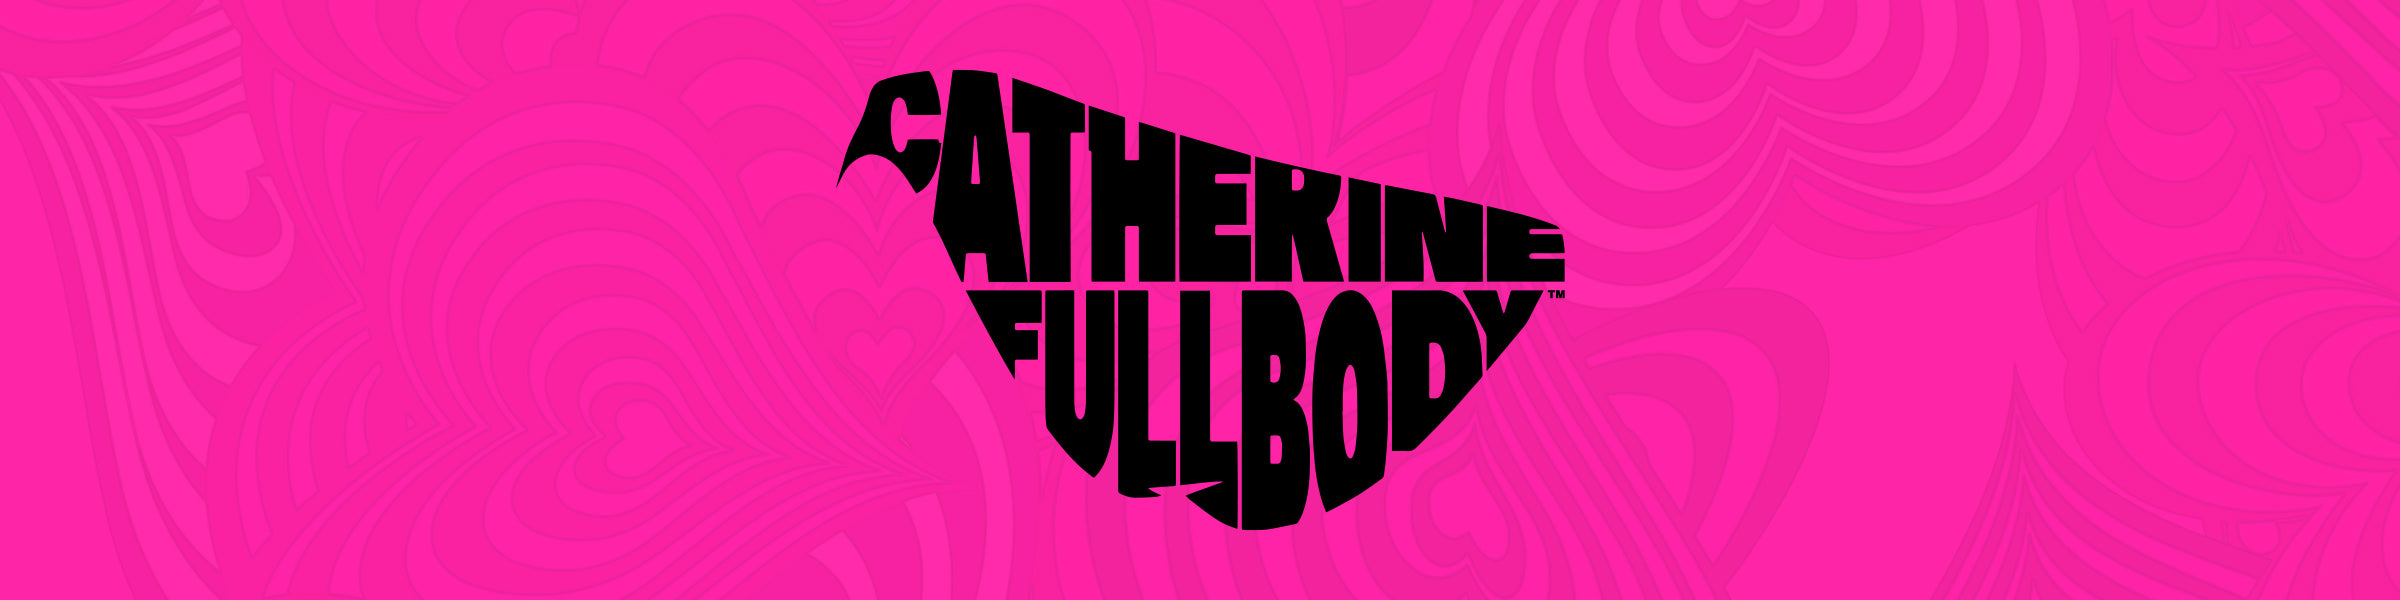 The Officially Licensed Catherine Fullbody Collection